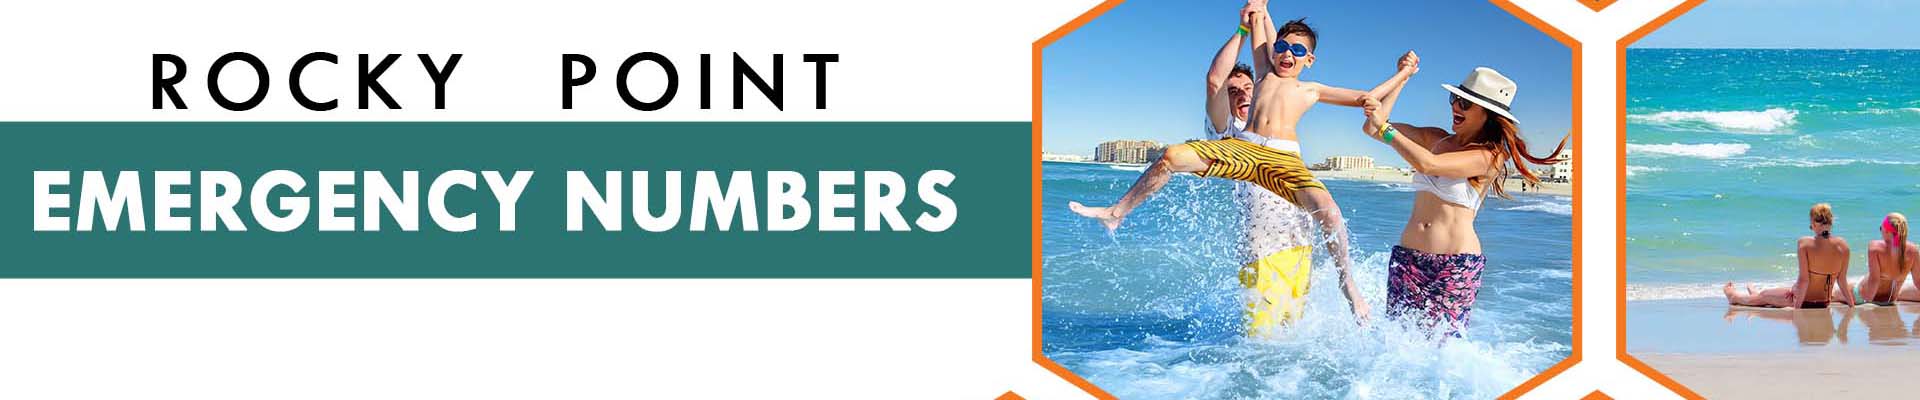 Rocky Point Other Services - Emergency Numbers, Sonoran Spa Puerto Peñasco, Mexico Arizona USA Website Banner